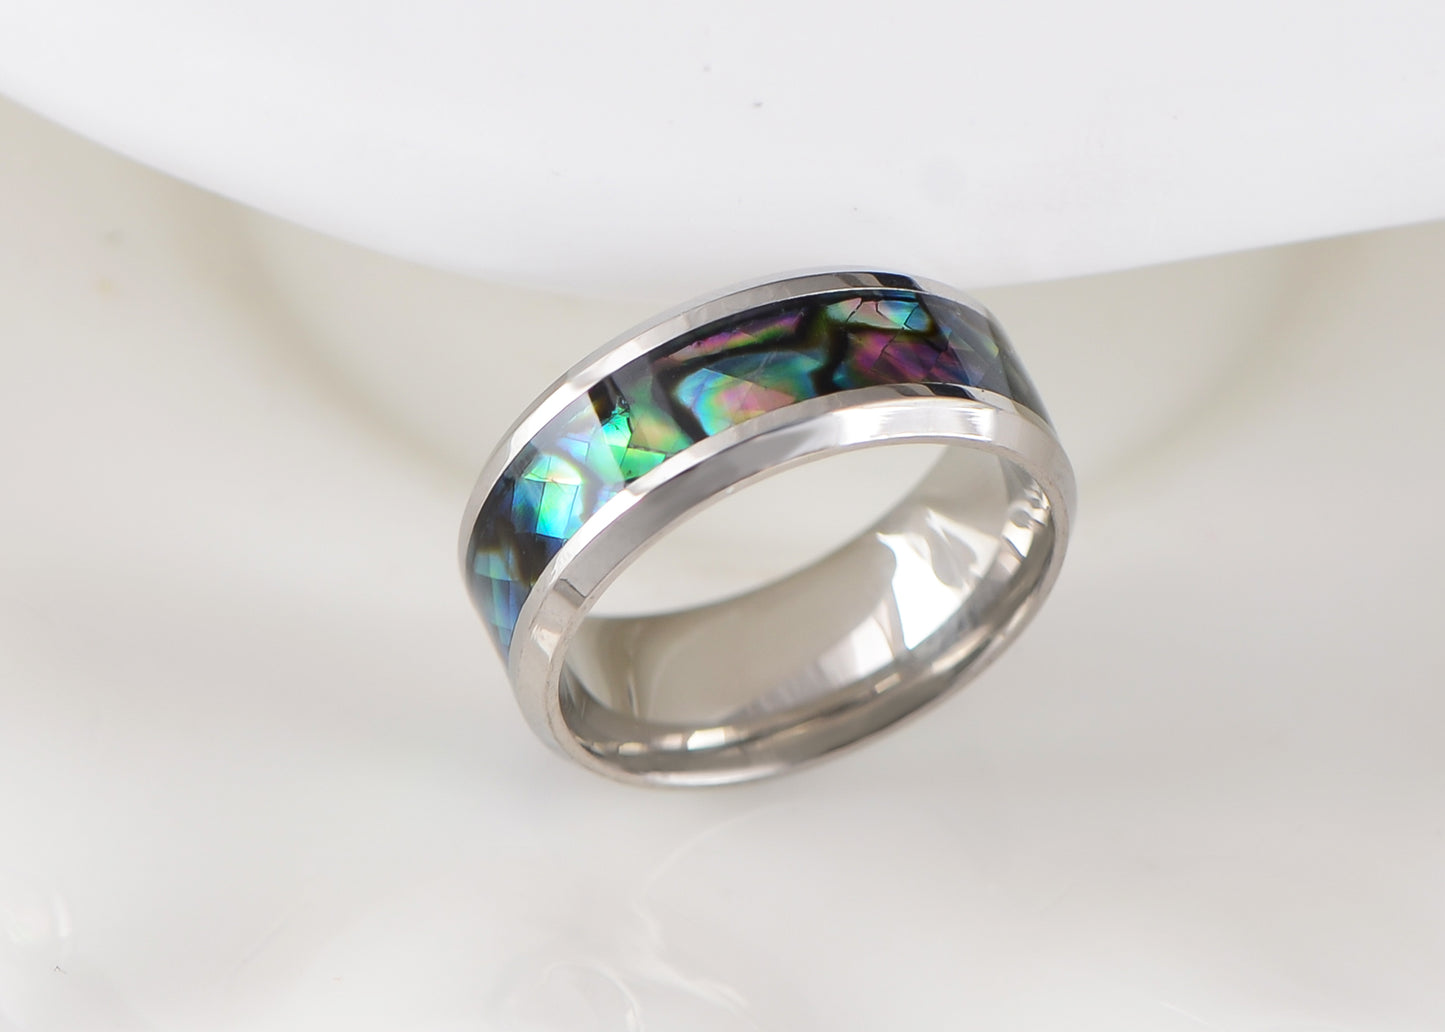 Alialng Abalone Shell Inlay Promise Rings for Men Women Couples Wedding Band